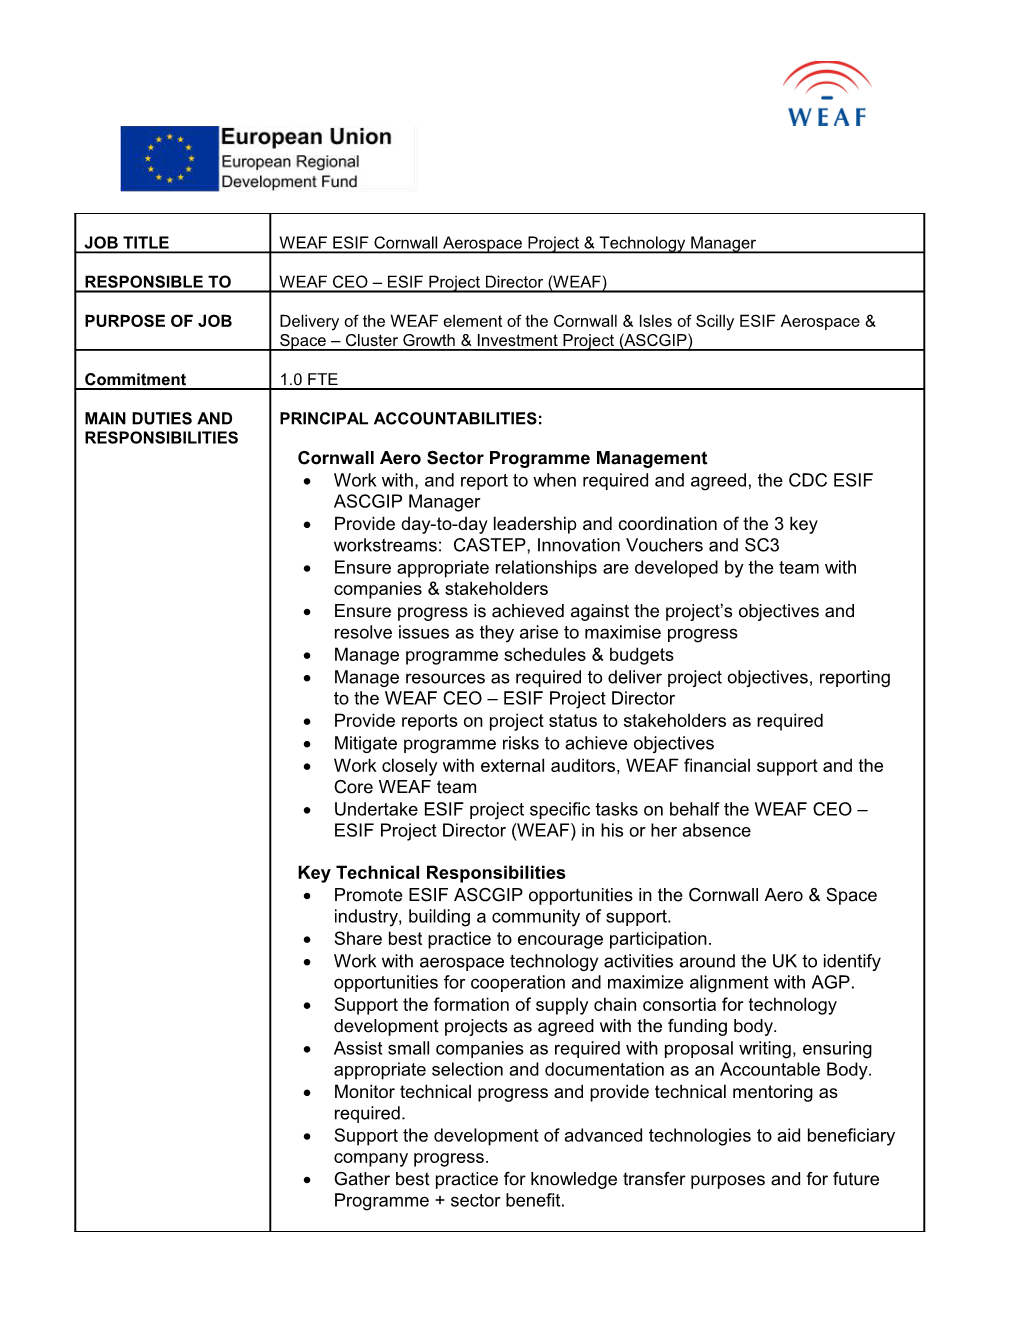 Work With, and Report to When Required and Agreed, the CDC ESIF ASCGIP Manager